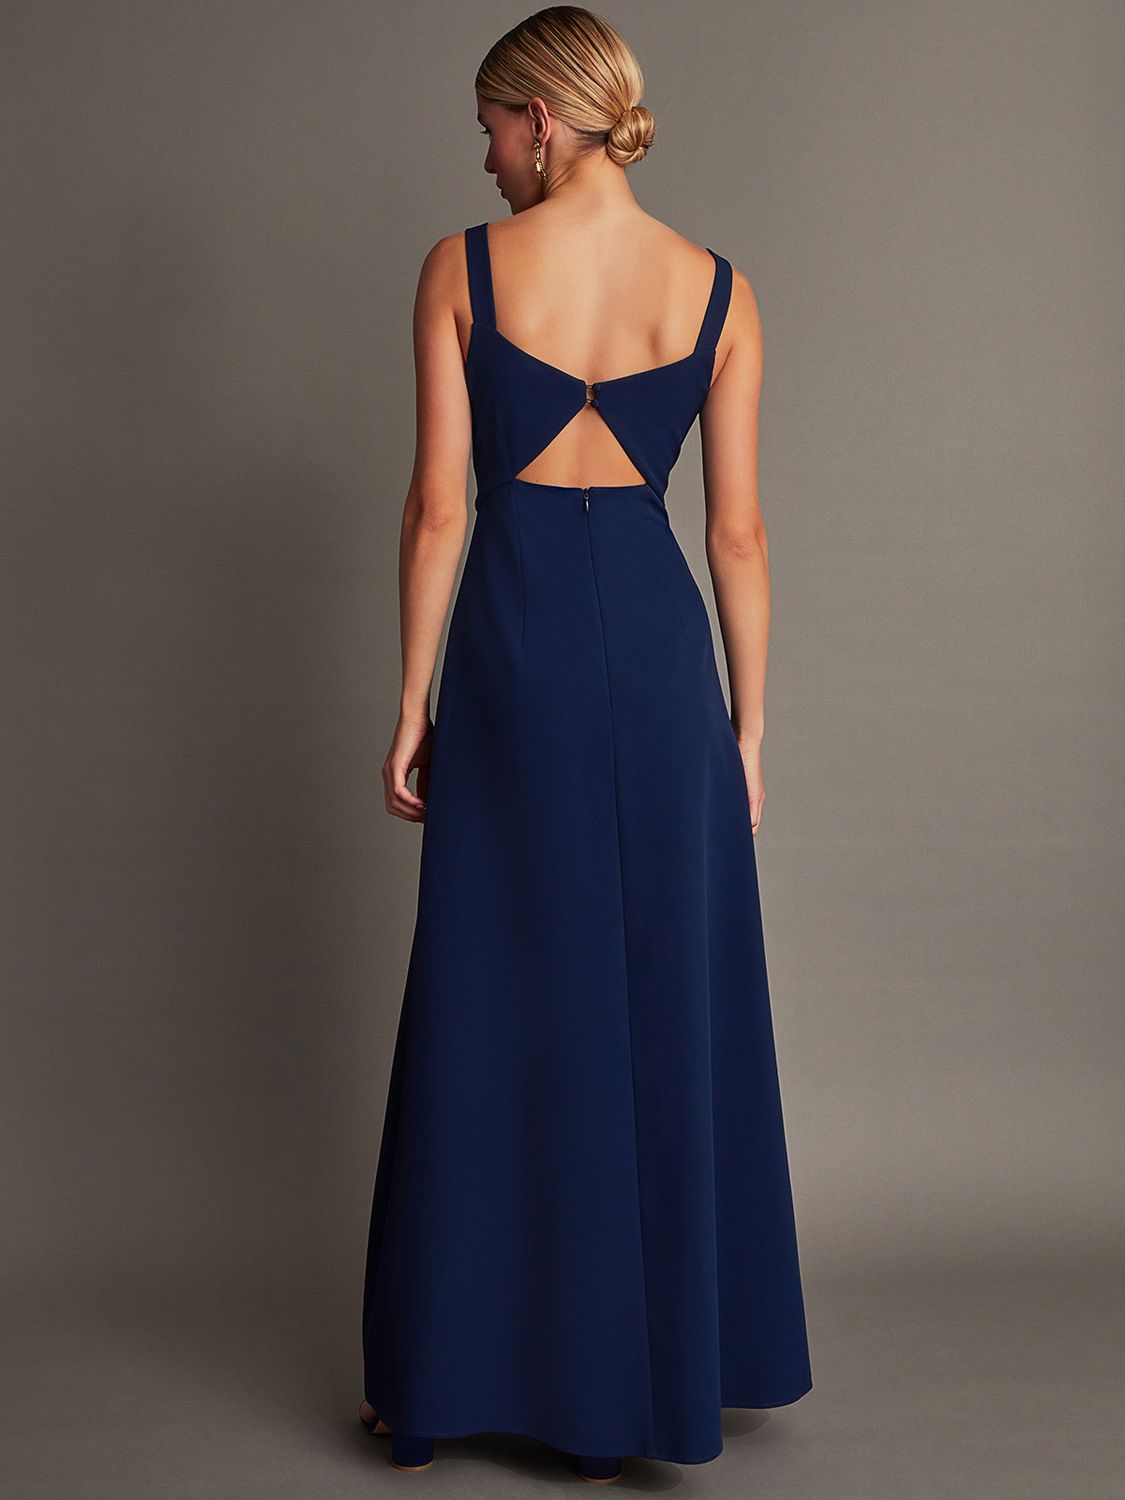 Buy Monsoon Molly Knot Maxi Dress, Navy Online at johnlewis.com